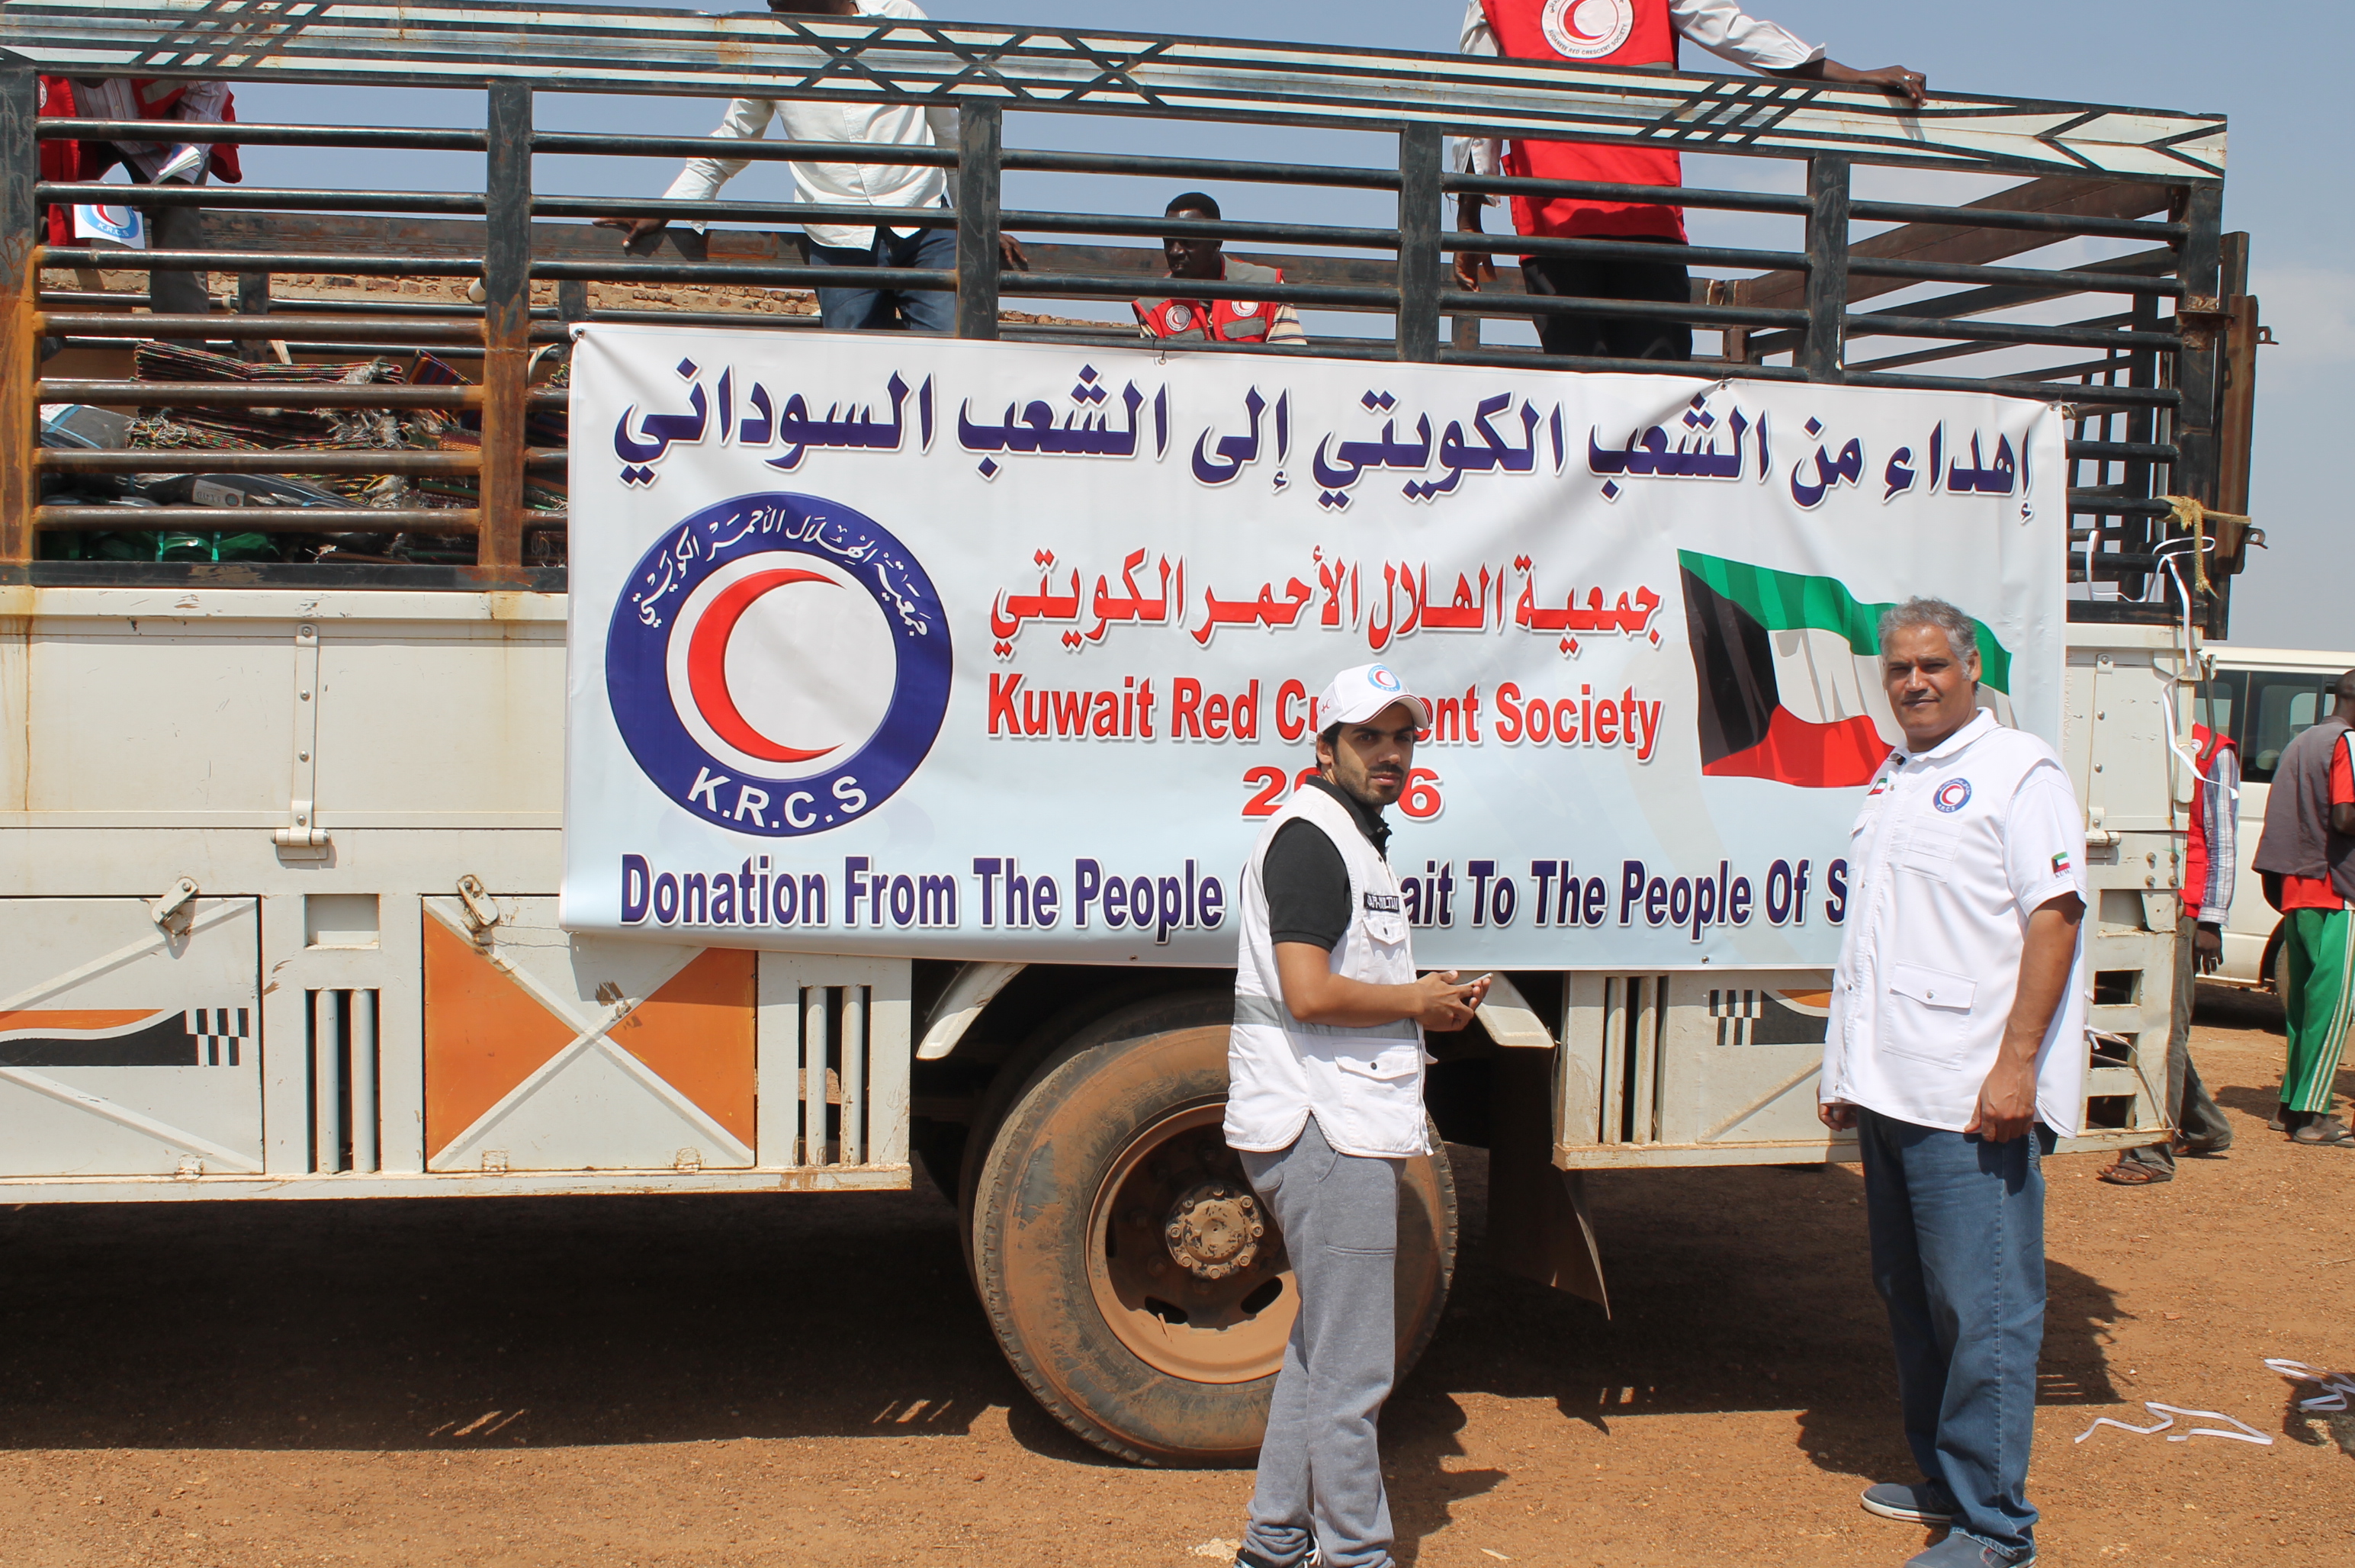 Kuwait Red Crescent Society (KRCS) distribution of relief aid for victims of floods that hit Sudan during the current rainy season